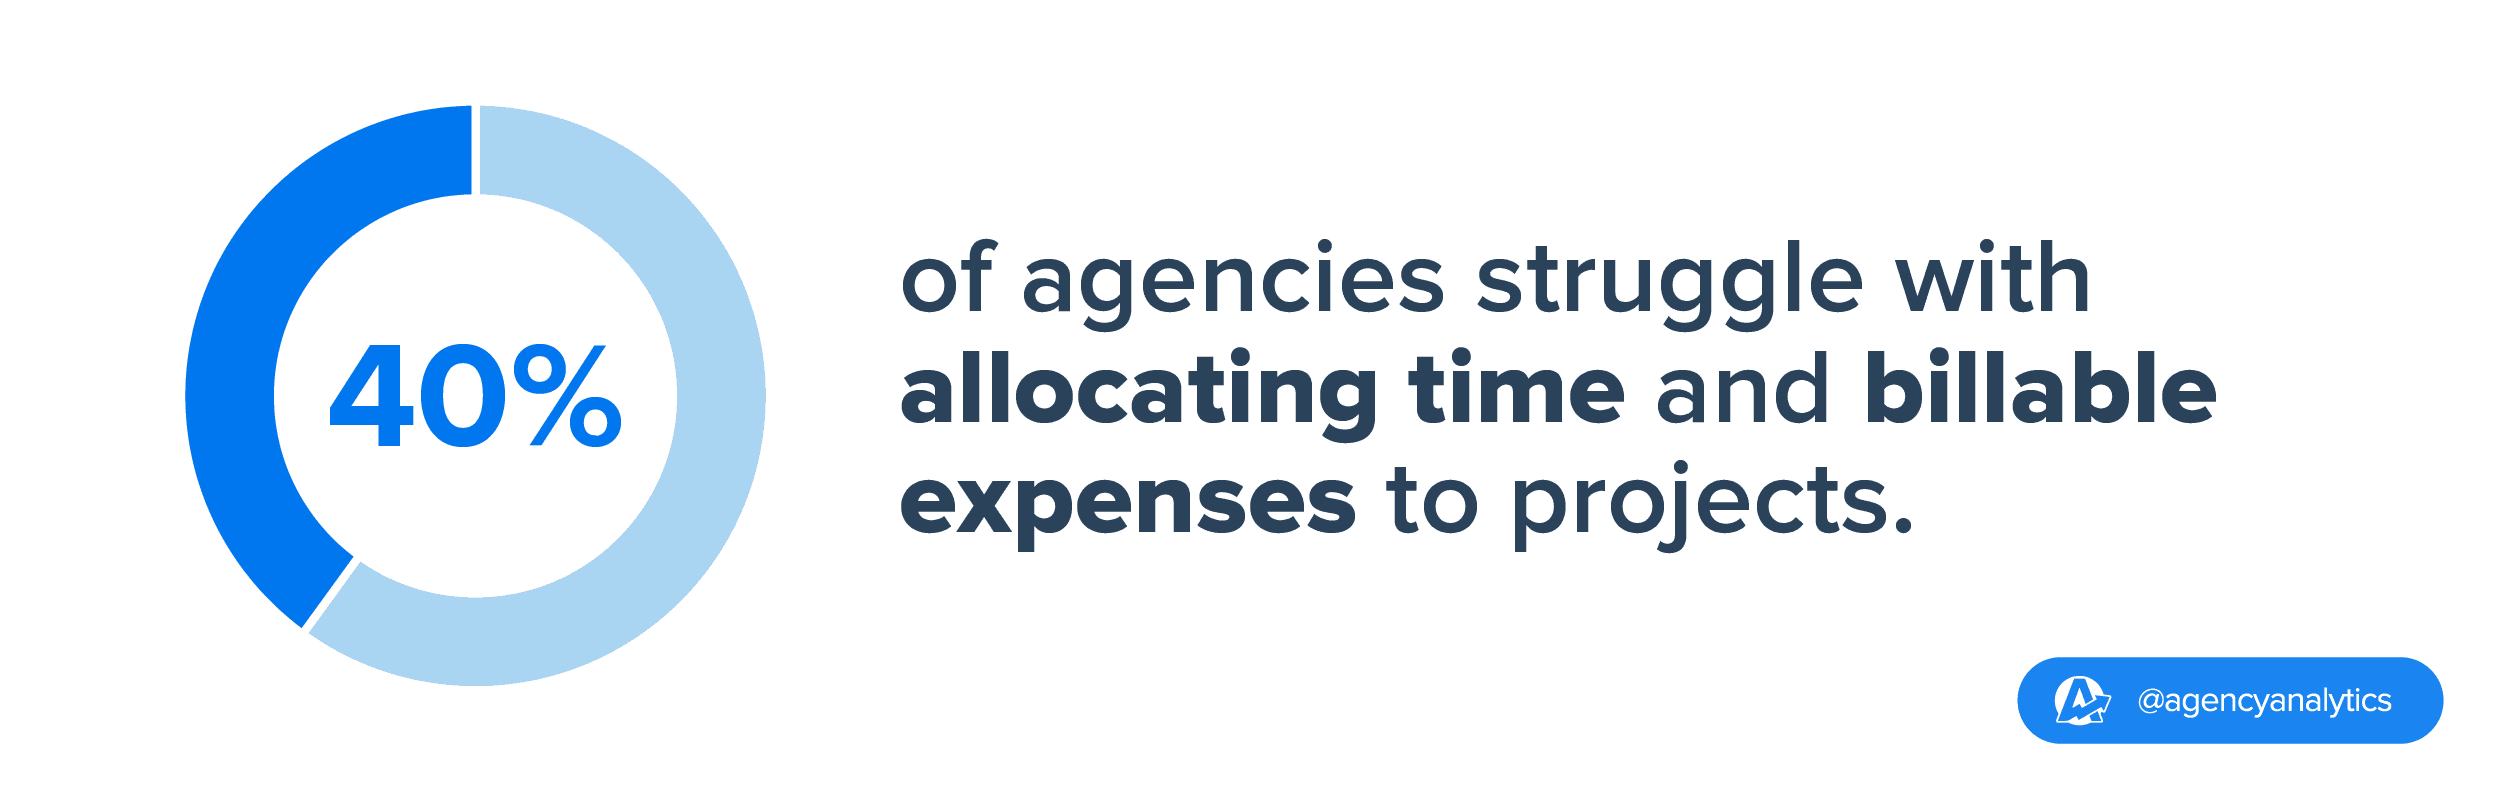  40% of agencies struggle with allocating time and billable expenses to projects